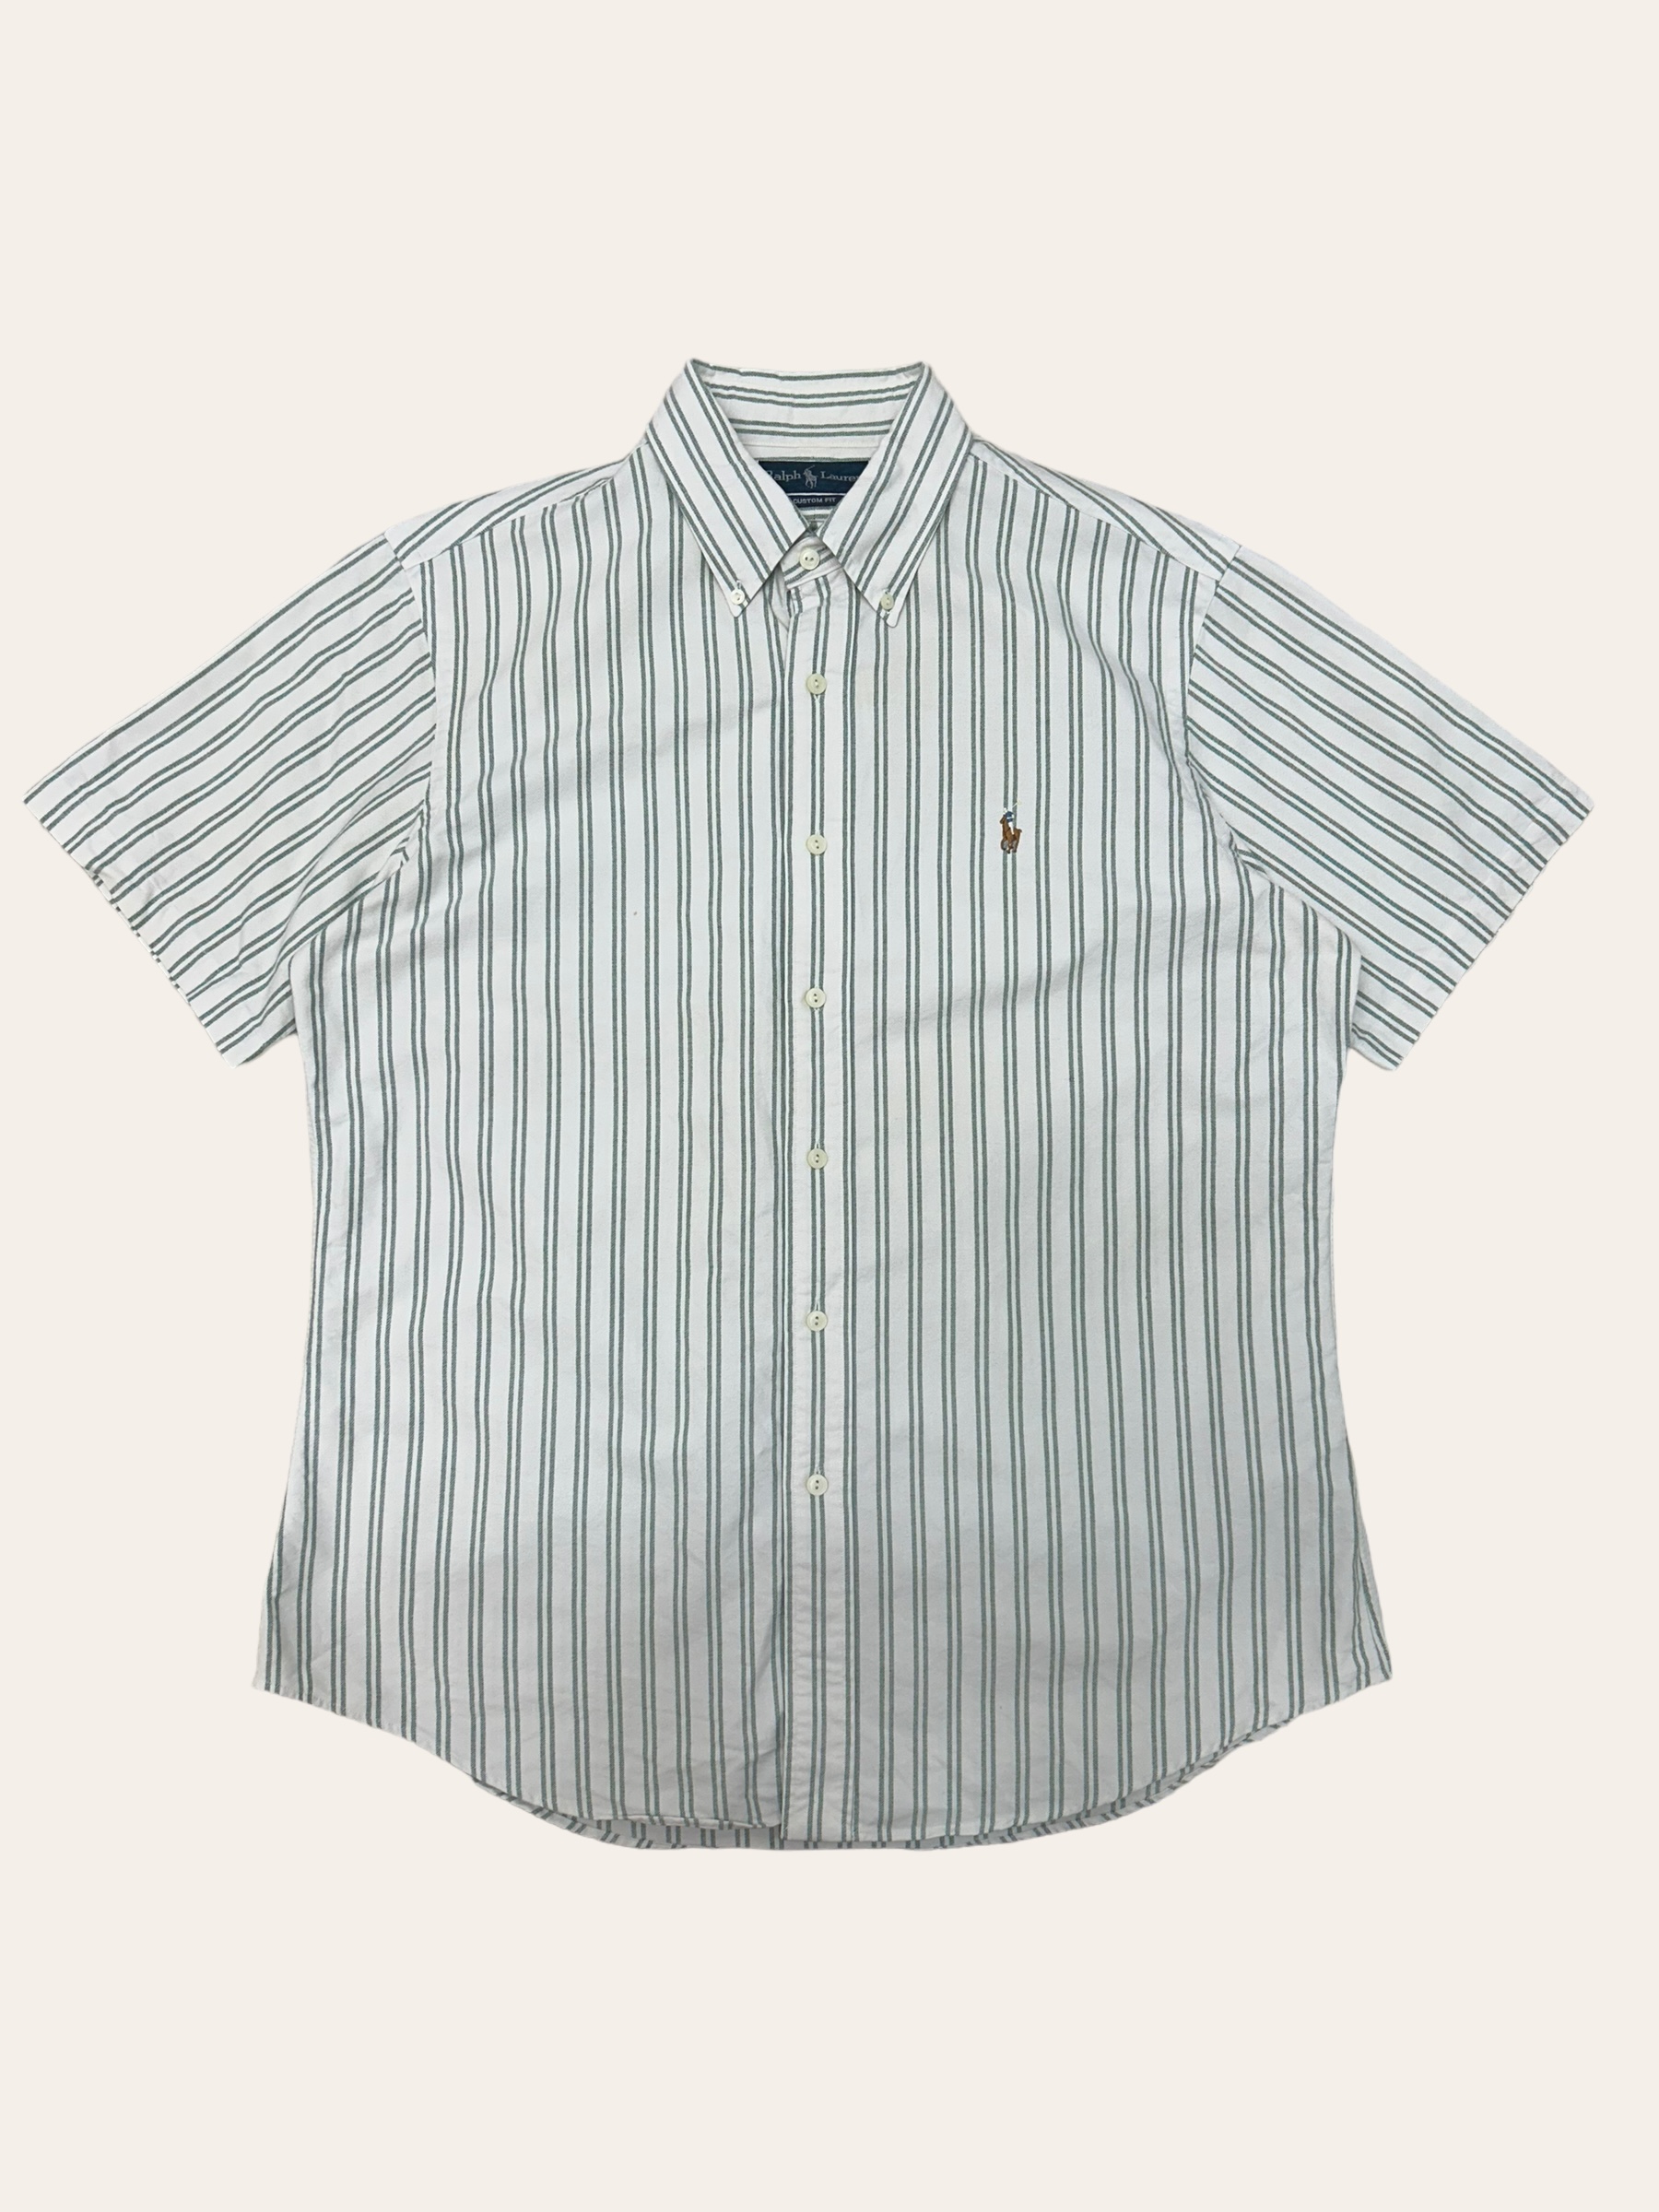 (From USA)Polo ralph lauren turquoise stripe oxford short sleeve shirt L